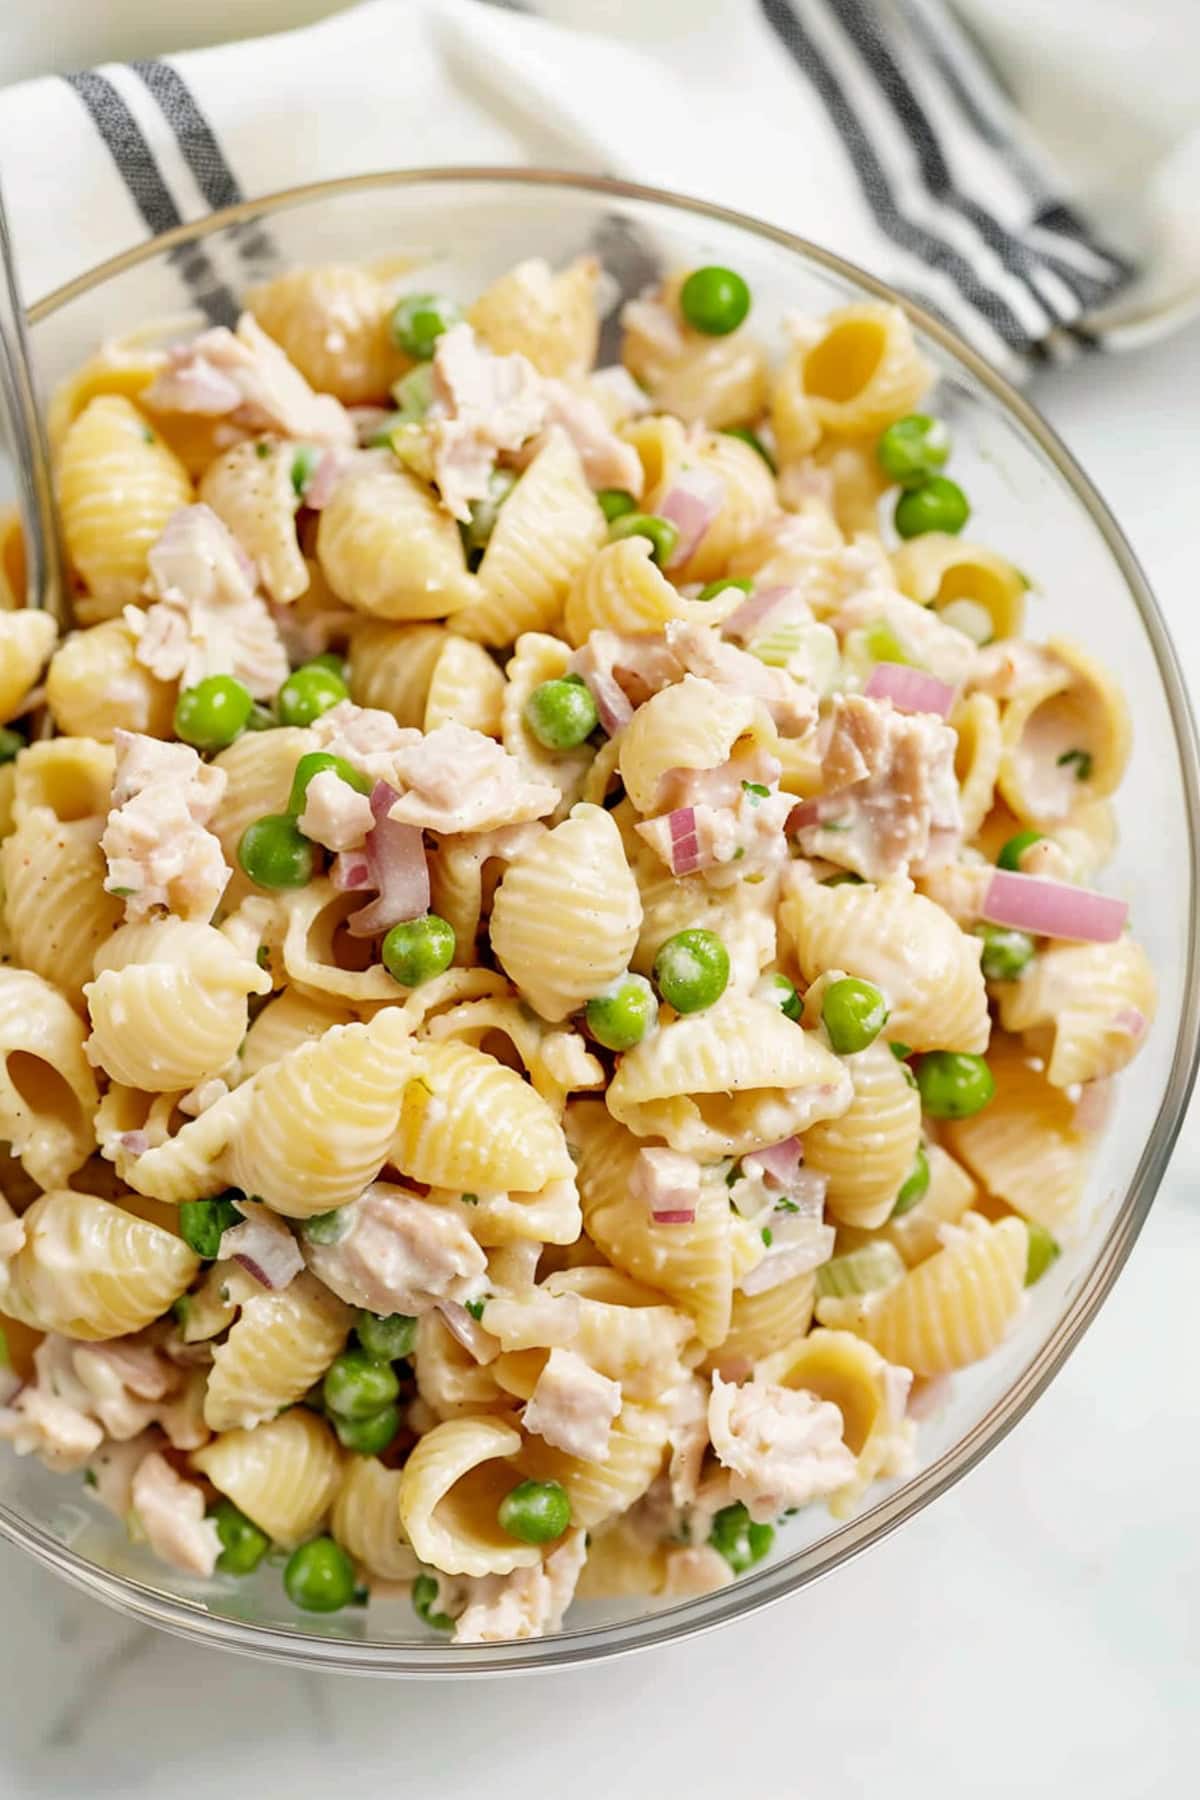 Tuna pasta salad with red onions and green peas in a glass bowl.